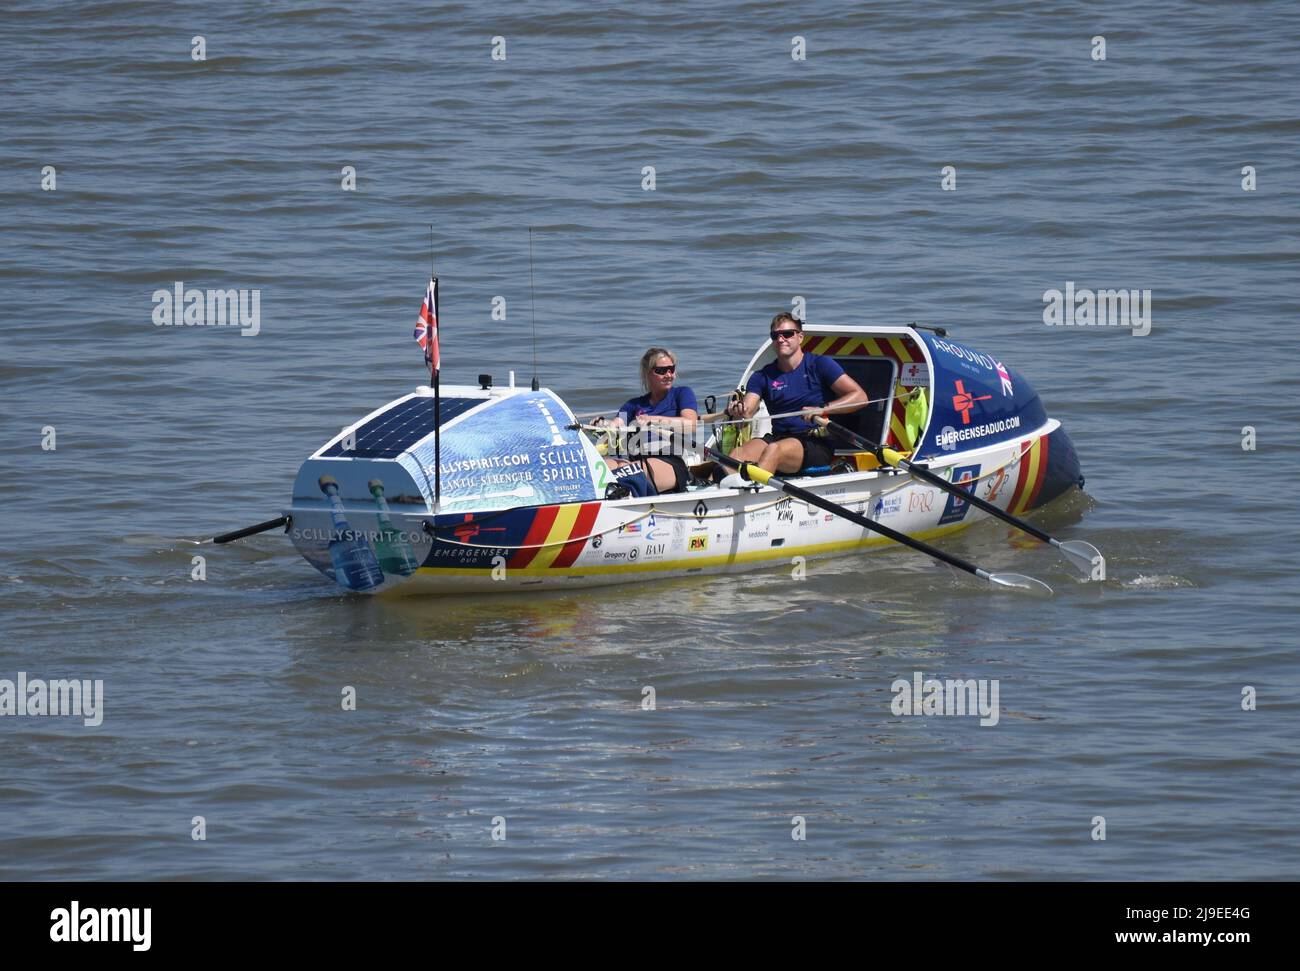 22/05/2022 Around Great Britain Row 2022. Gravesend UK The Emergensea Duo are two paramedics on a voyage hoping to circumnavigating Great Britain in t Stock Photo